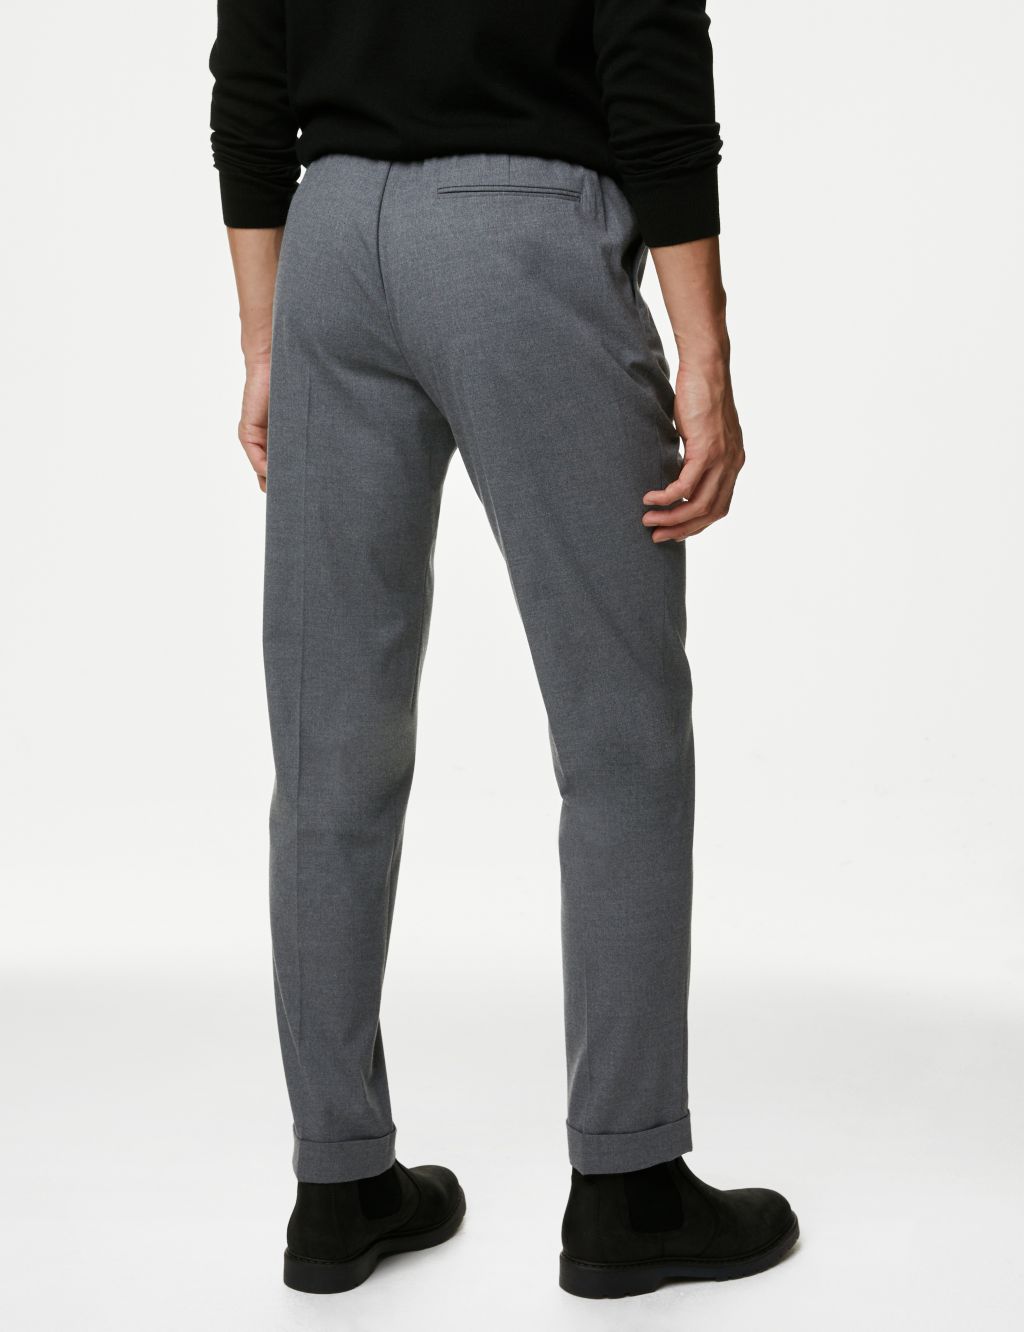 Single Pleat Brushed Stretch Trouser image 4